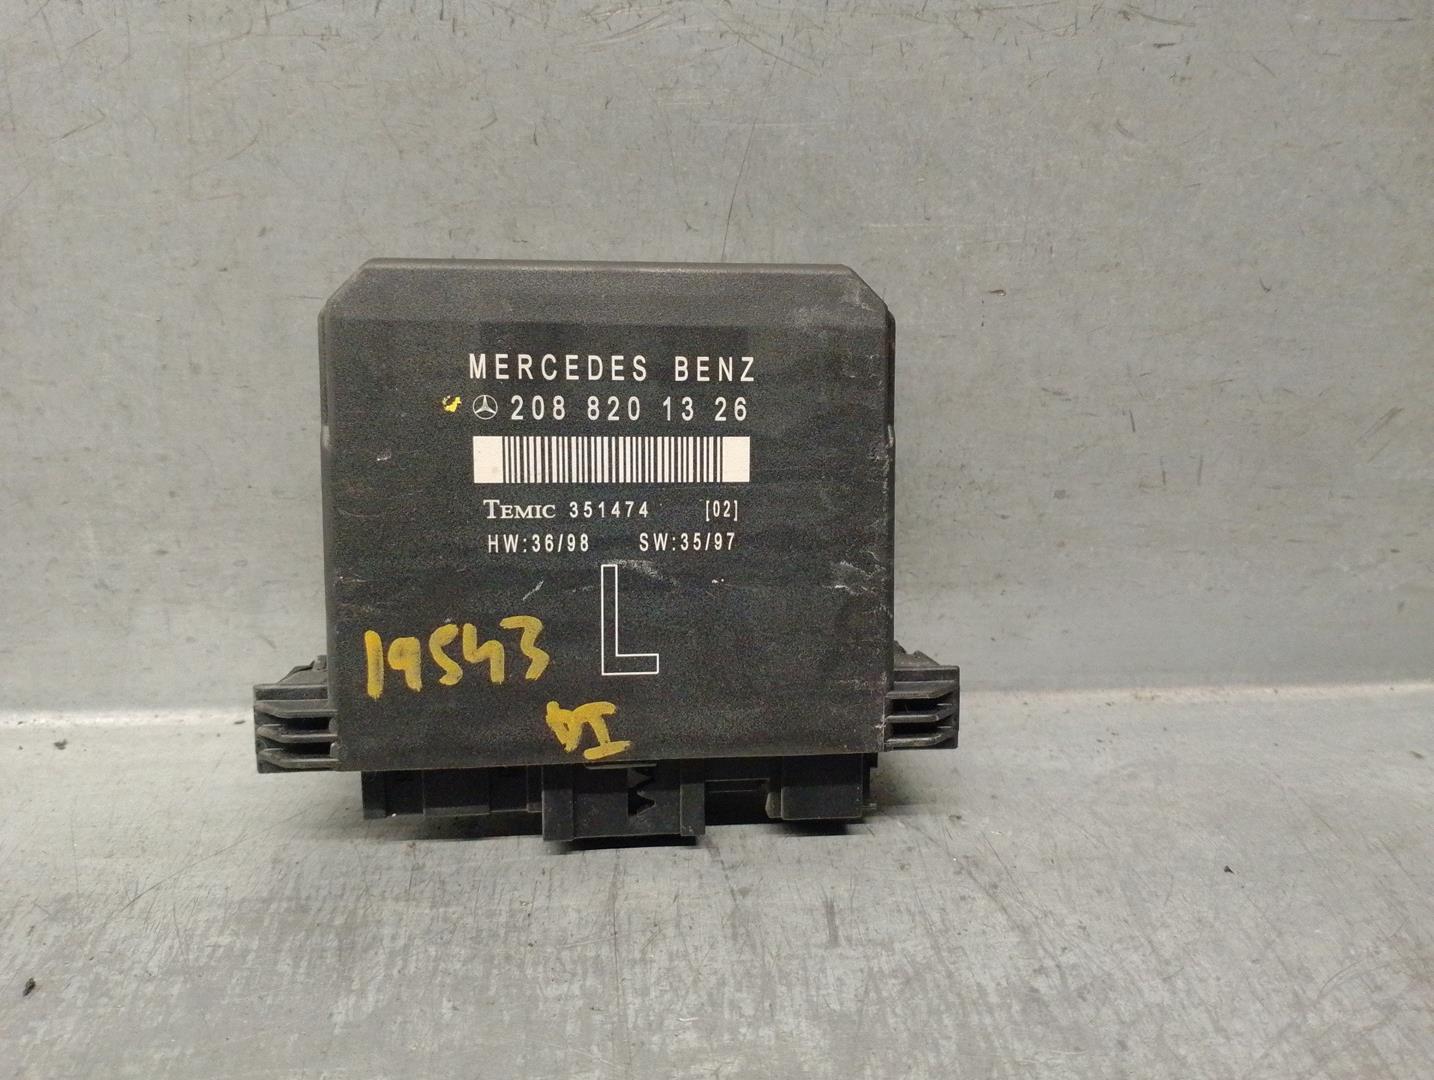 MERCEDES-BENZ C-Class W202/S202 (1993-2001) Other Control Units 2088201326, 351474, TEMIC 22780829